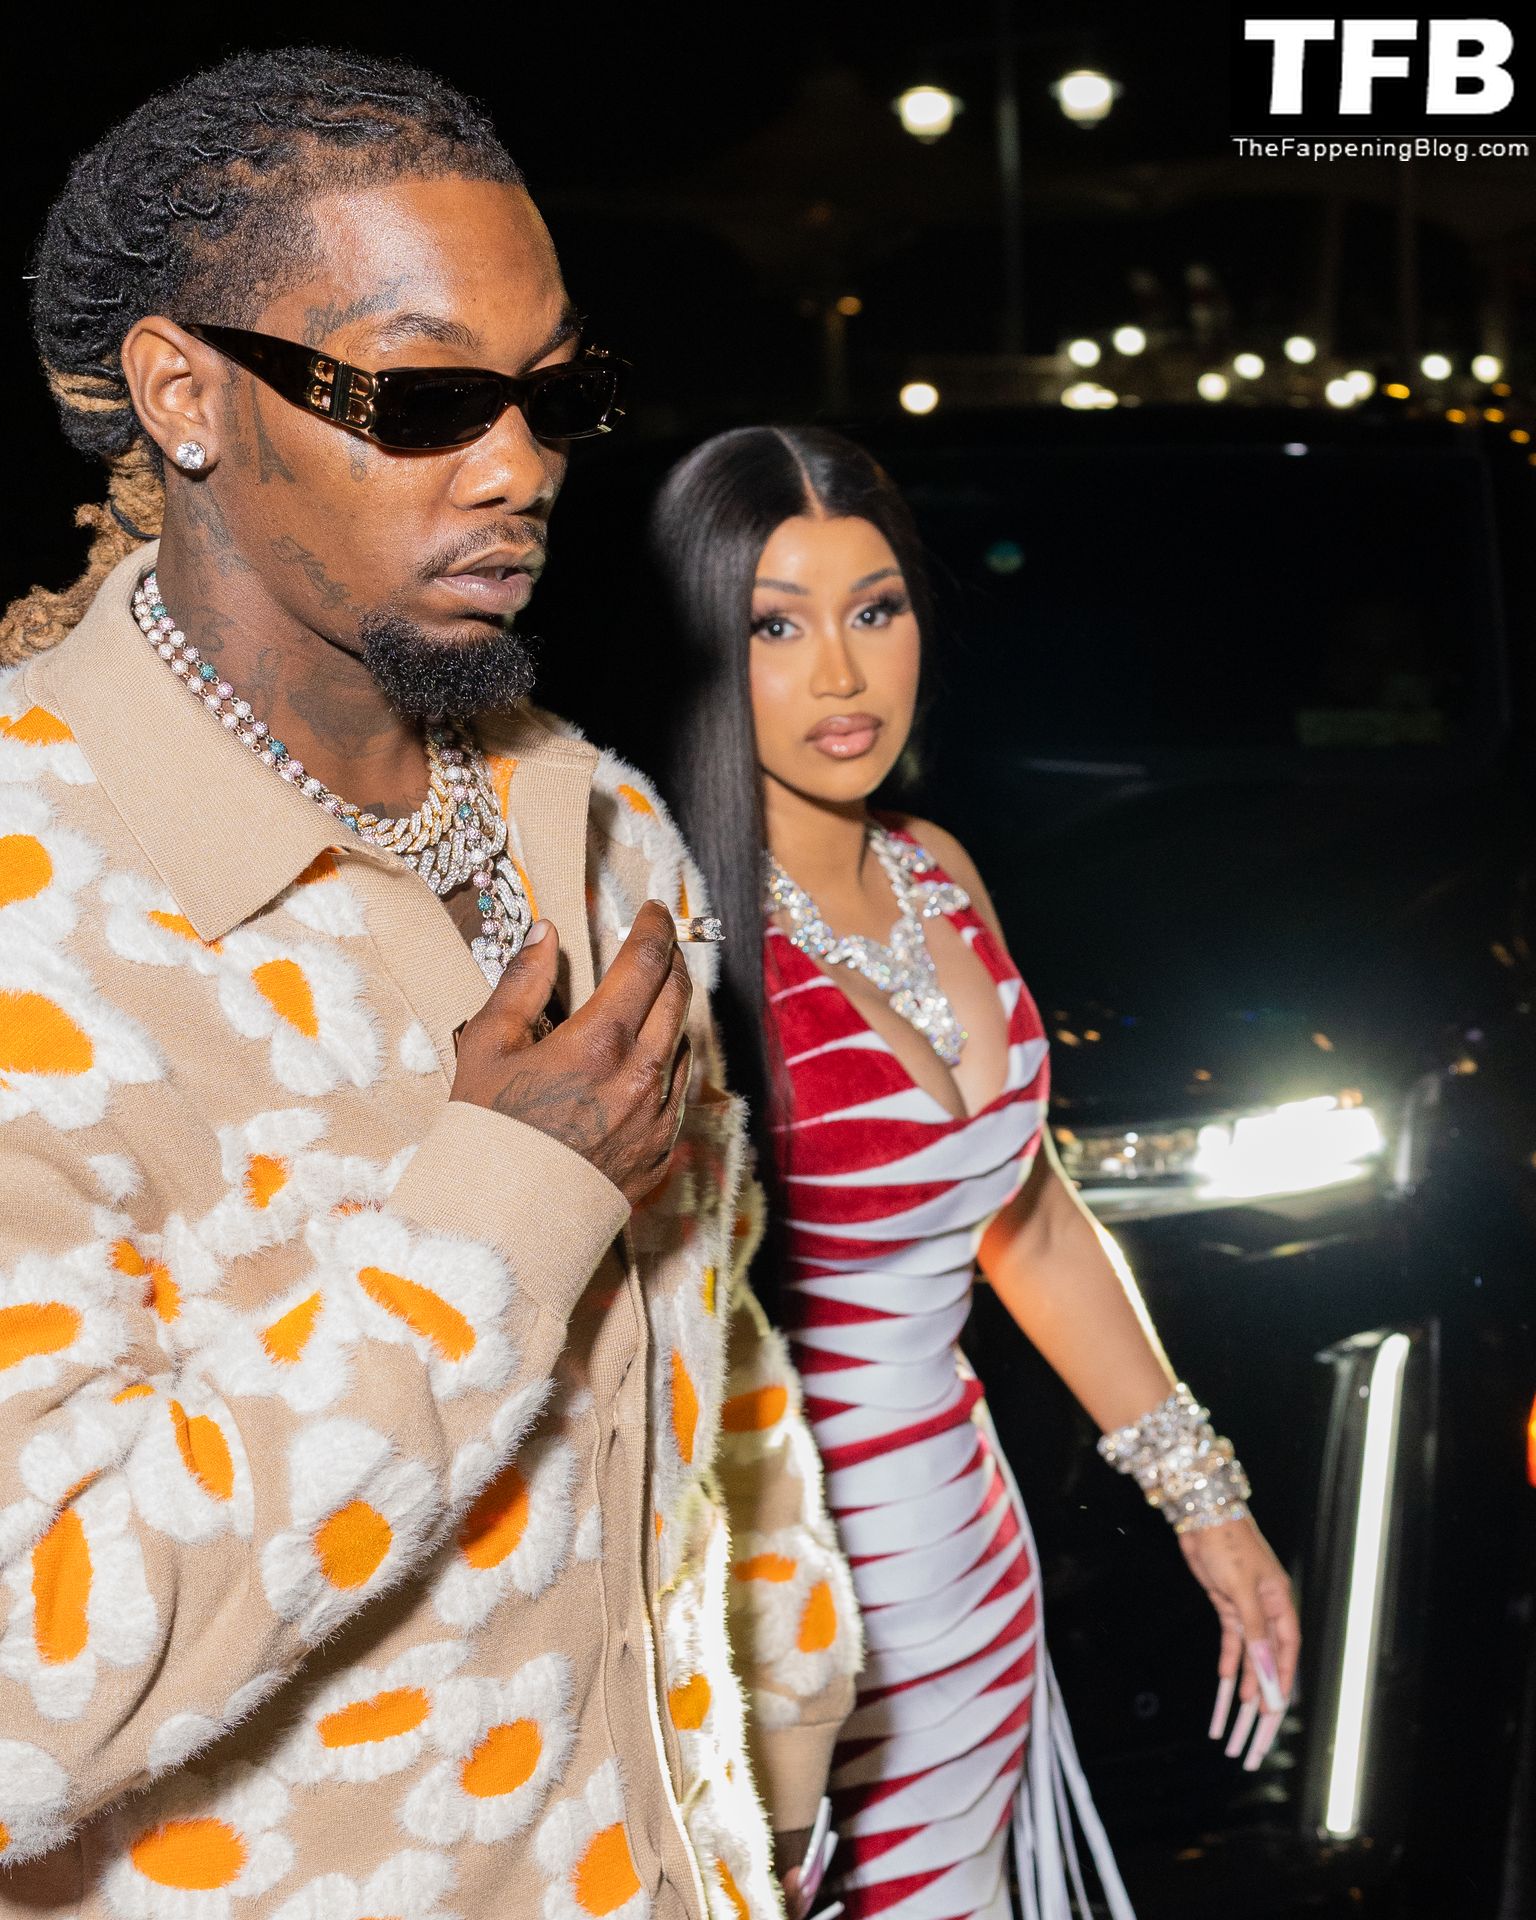 Cardi B Sexy Tits The Fappening Blog 1 - Cardi B Flaunts Her Cleavage as She Leaves a Club with Offset in NYC (8 Photos)